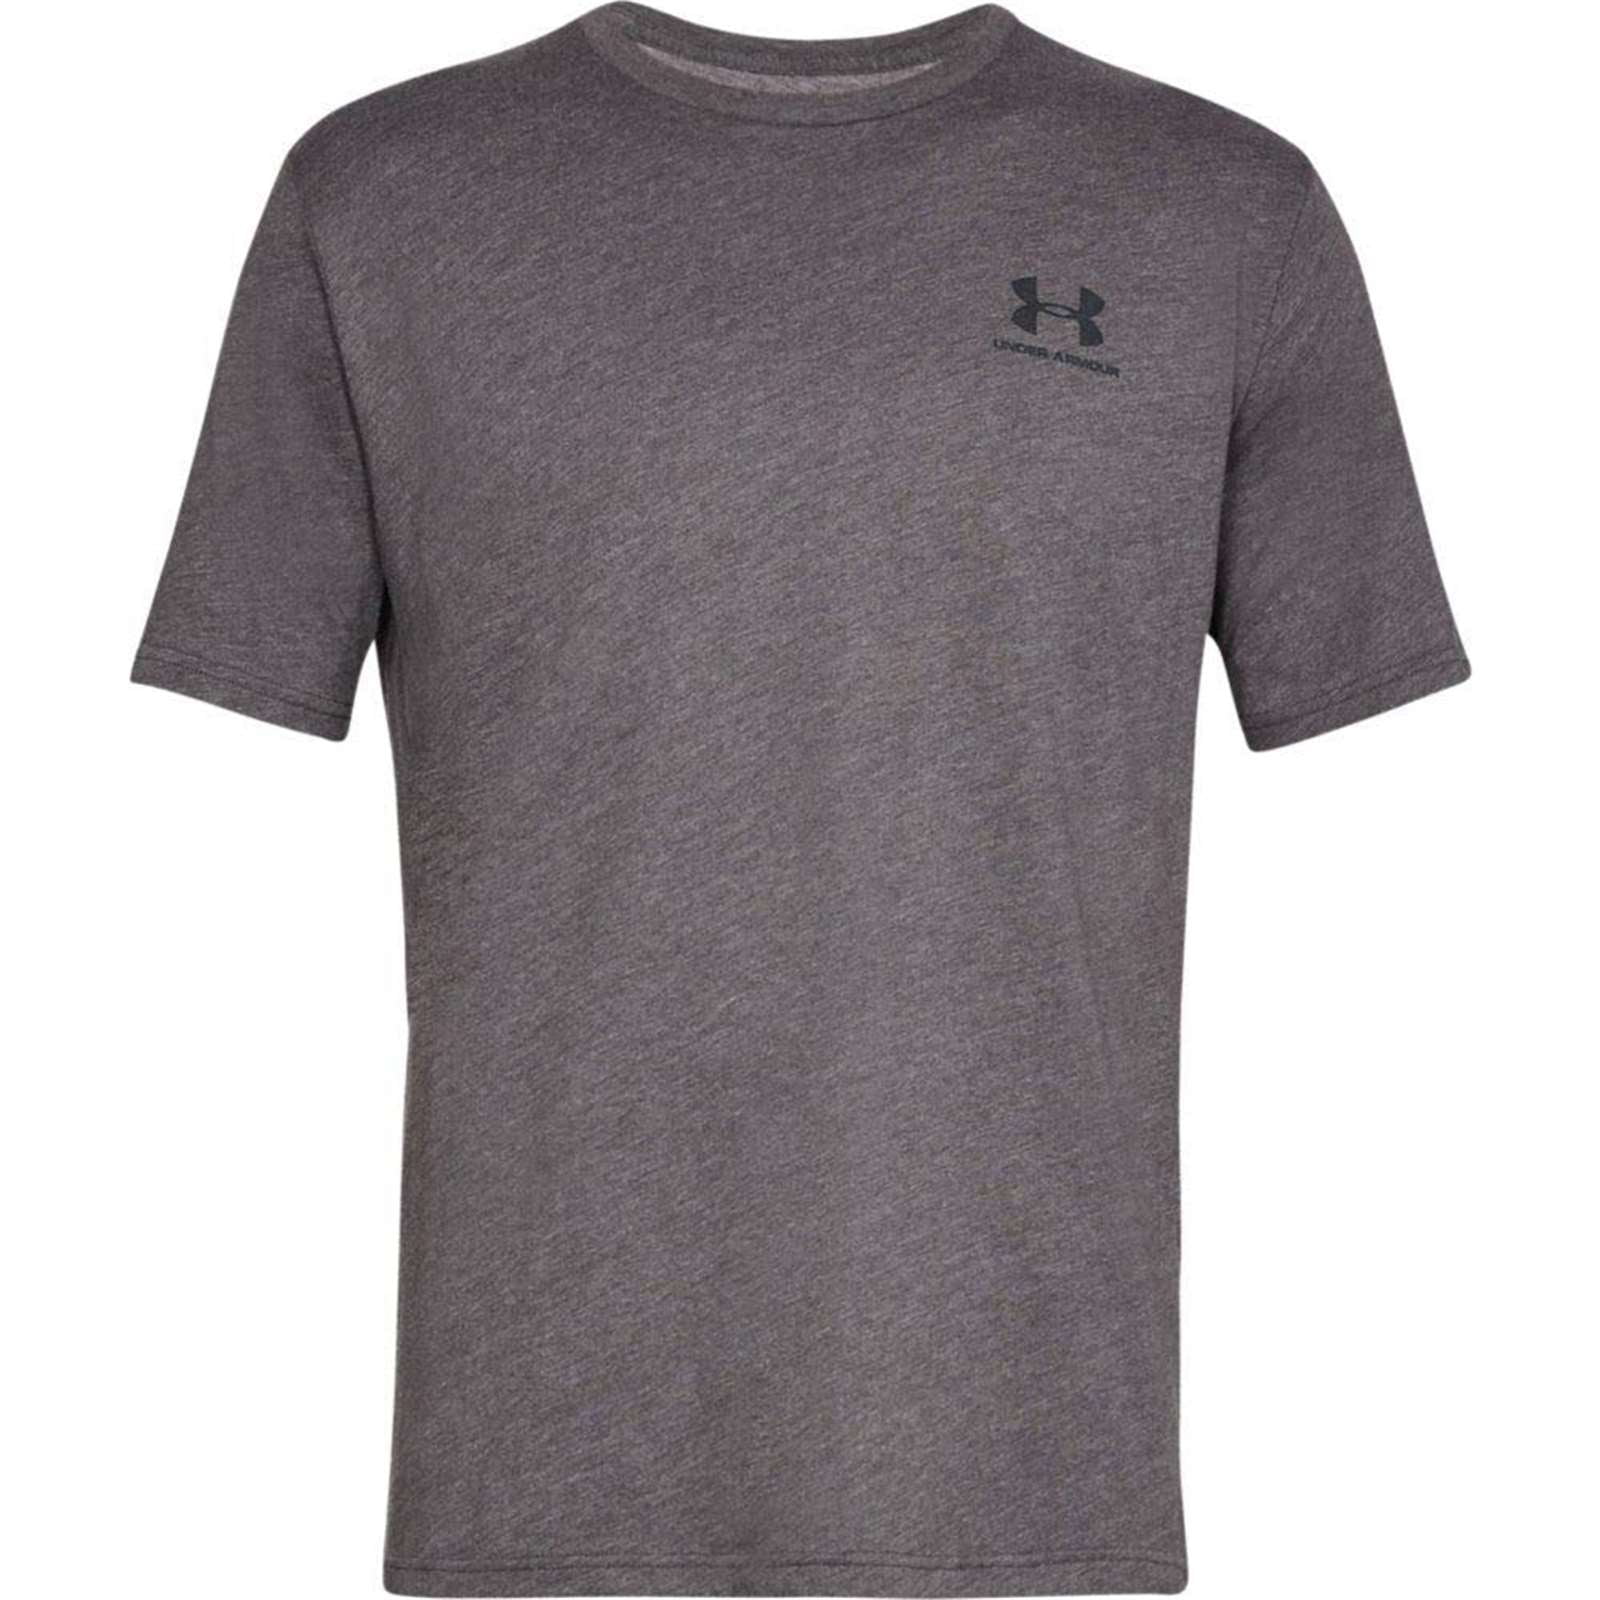 L Under Armour Sportstyle Core Mens Short Sleeve Fitness Training T-Shirt